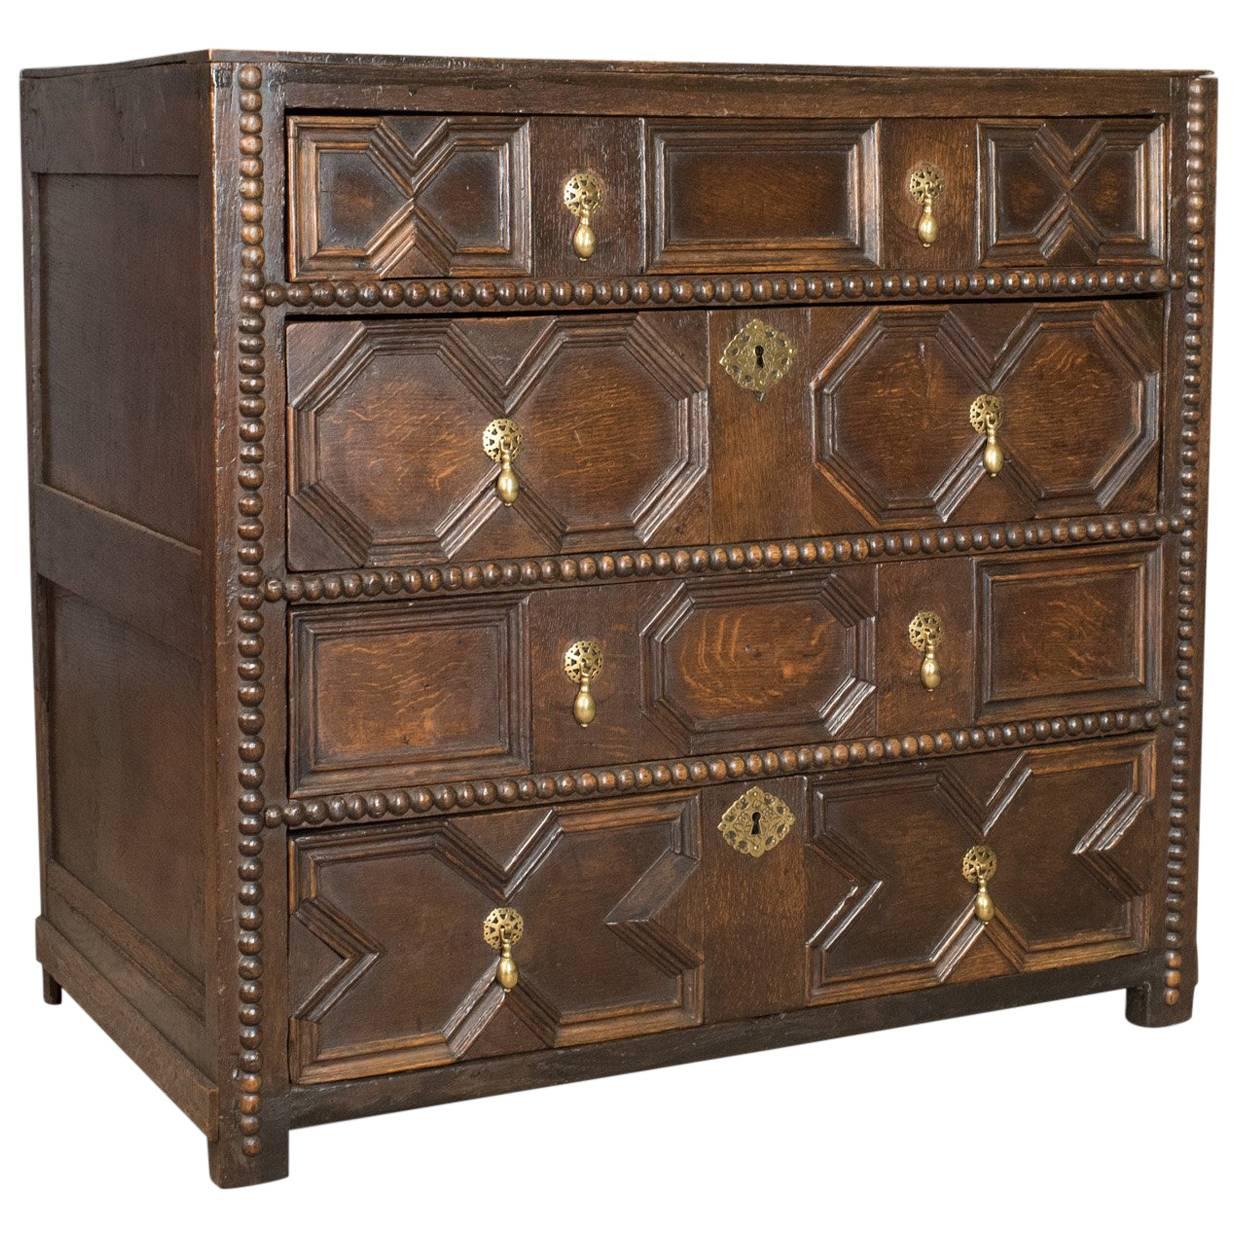 Antique Chest of Drawers, English, Oak, Late 17th Century, circa 1690